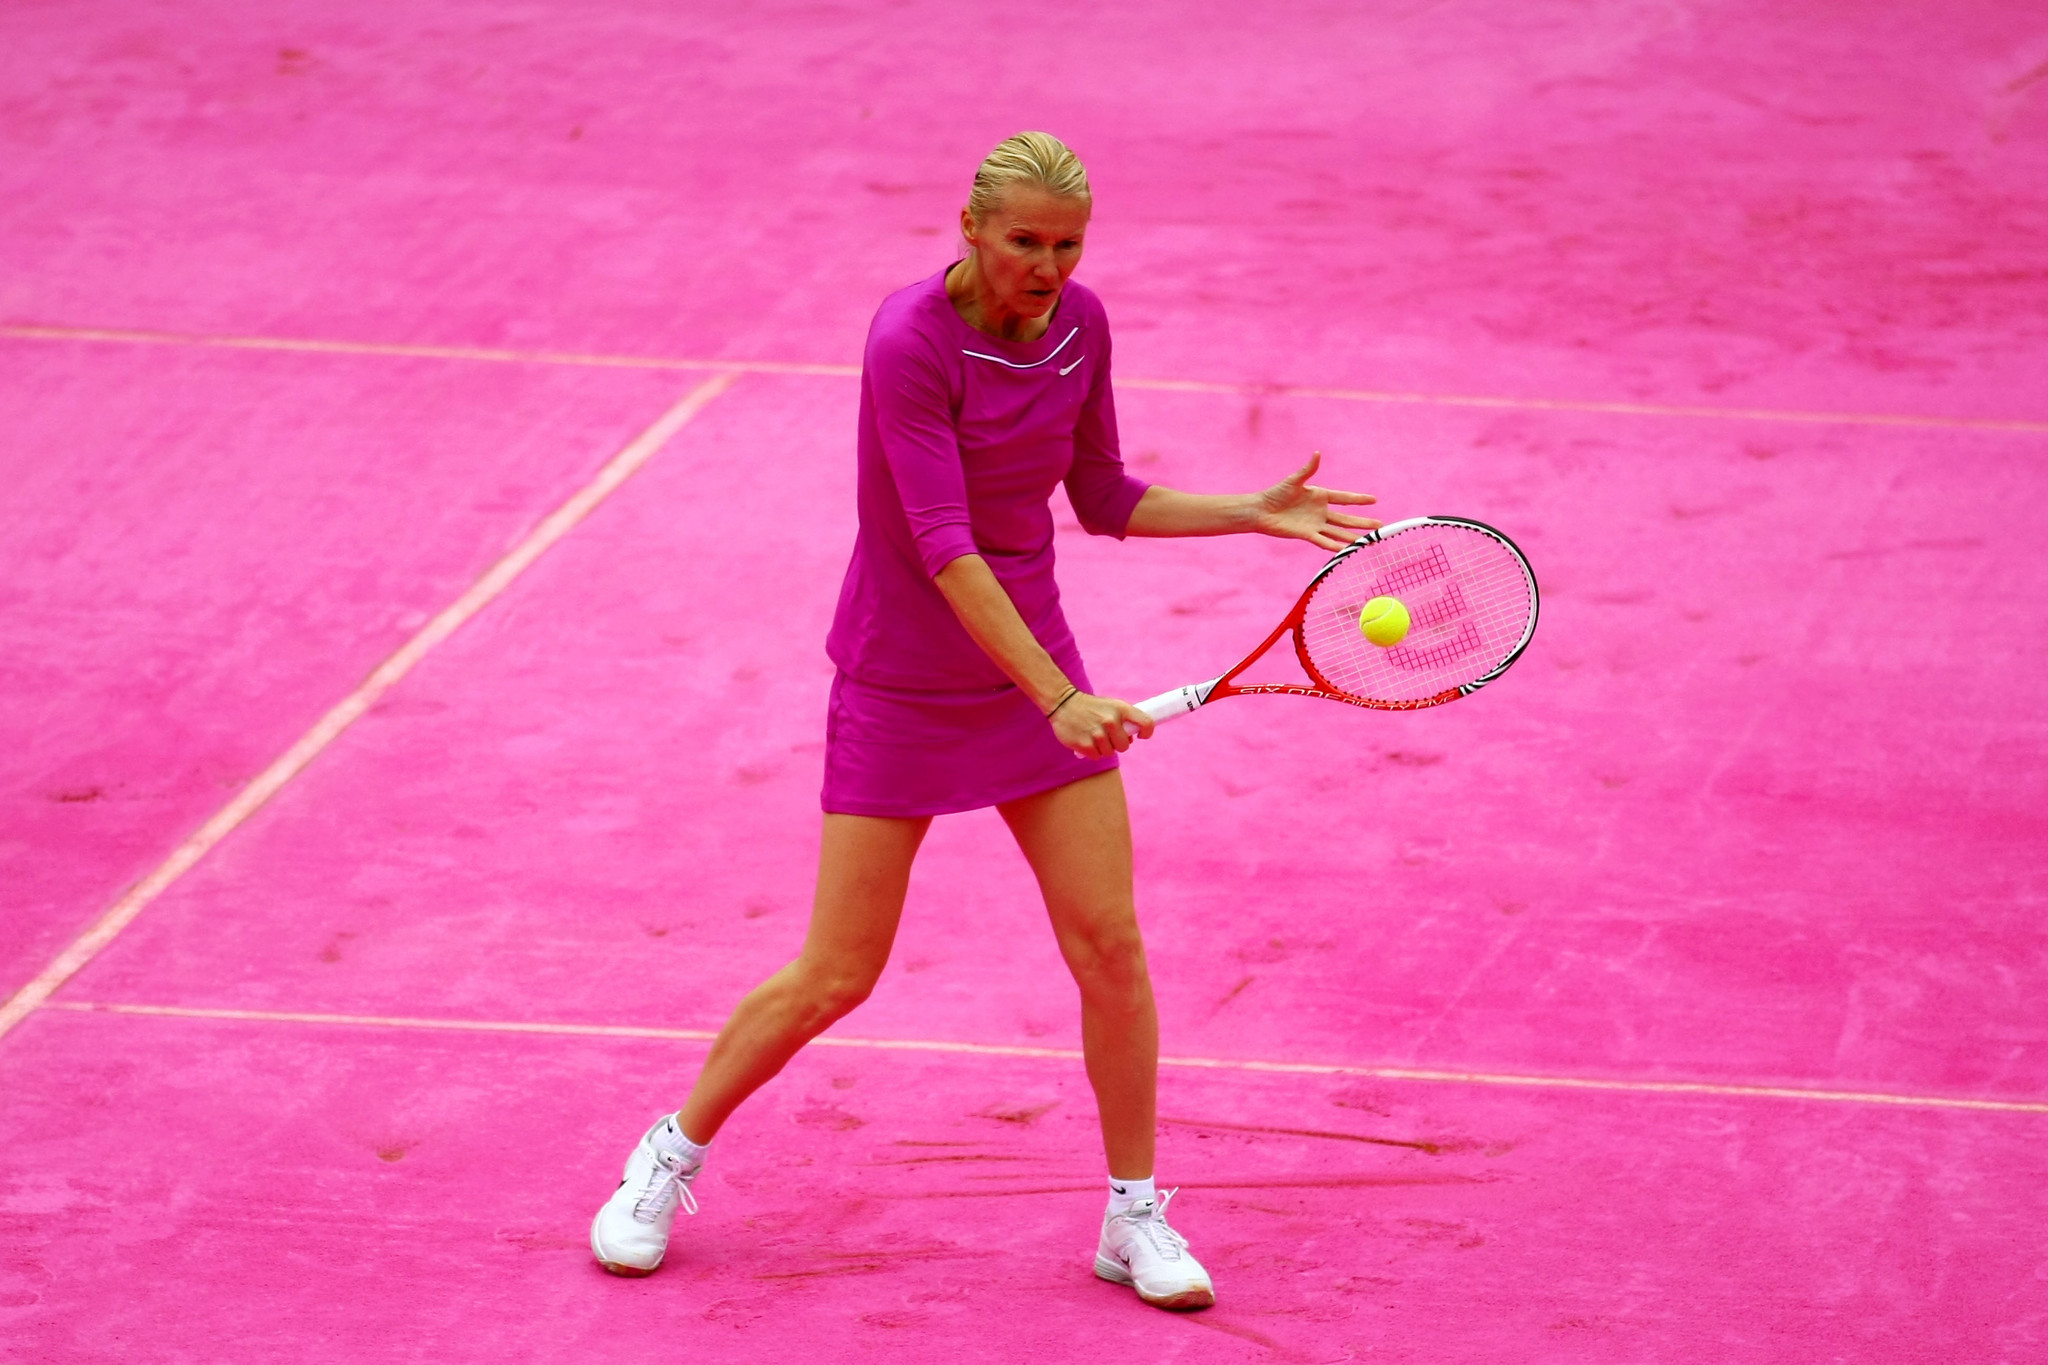 Jana Novotna, pictured here in the women's legends doubles at the French Open at Roland Garros in 2012, has died at the age of 49 ©Getty Images